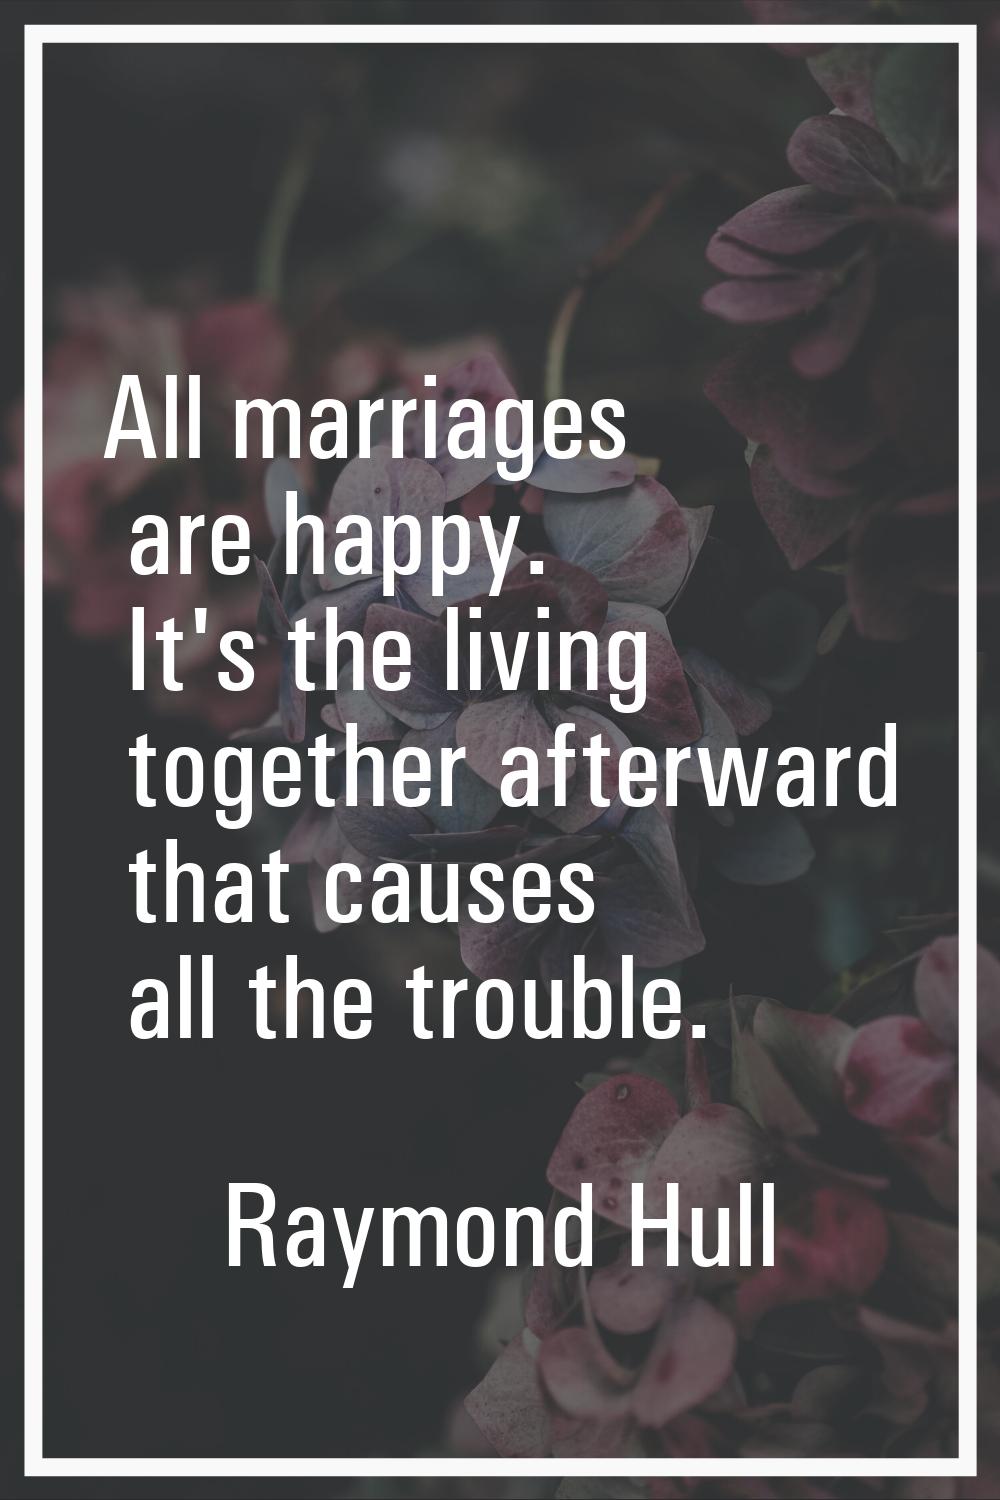 All marriages are happy. It's the living together afterward that causes all the trouble.